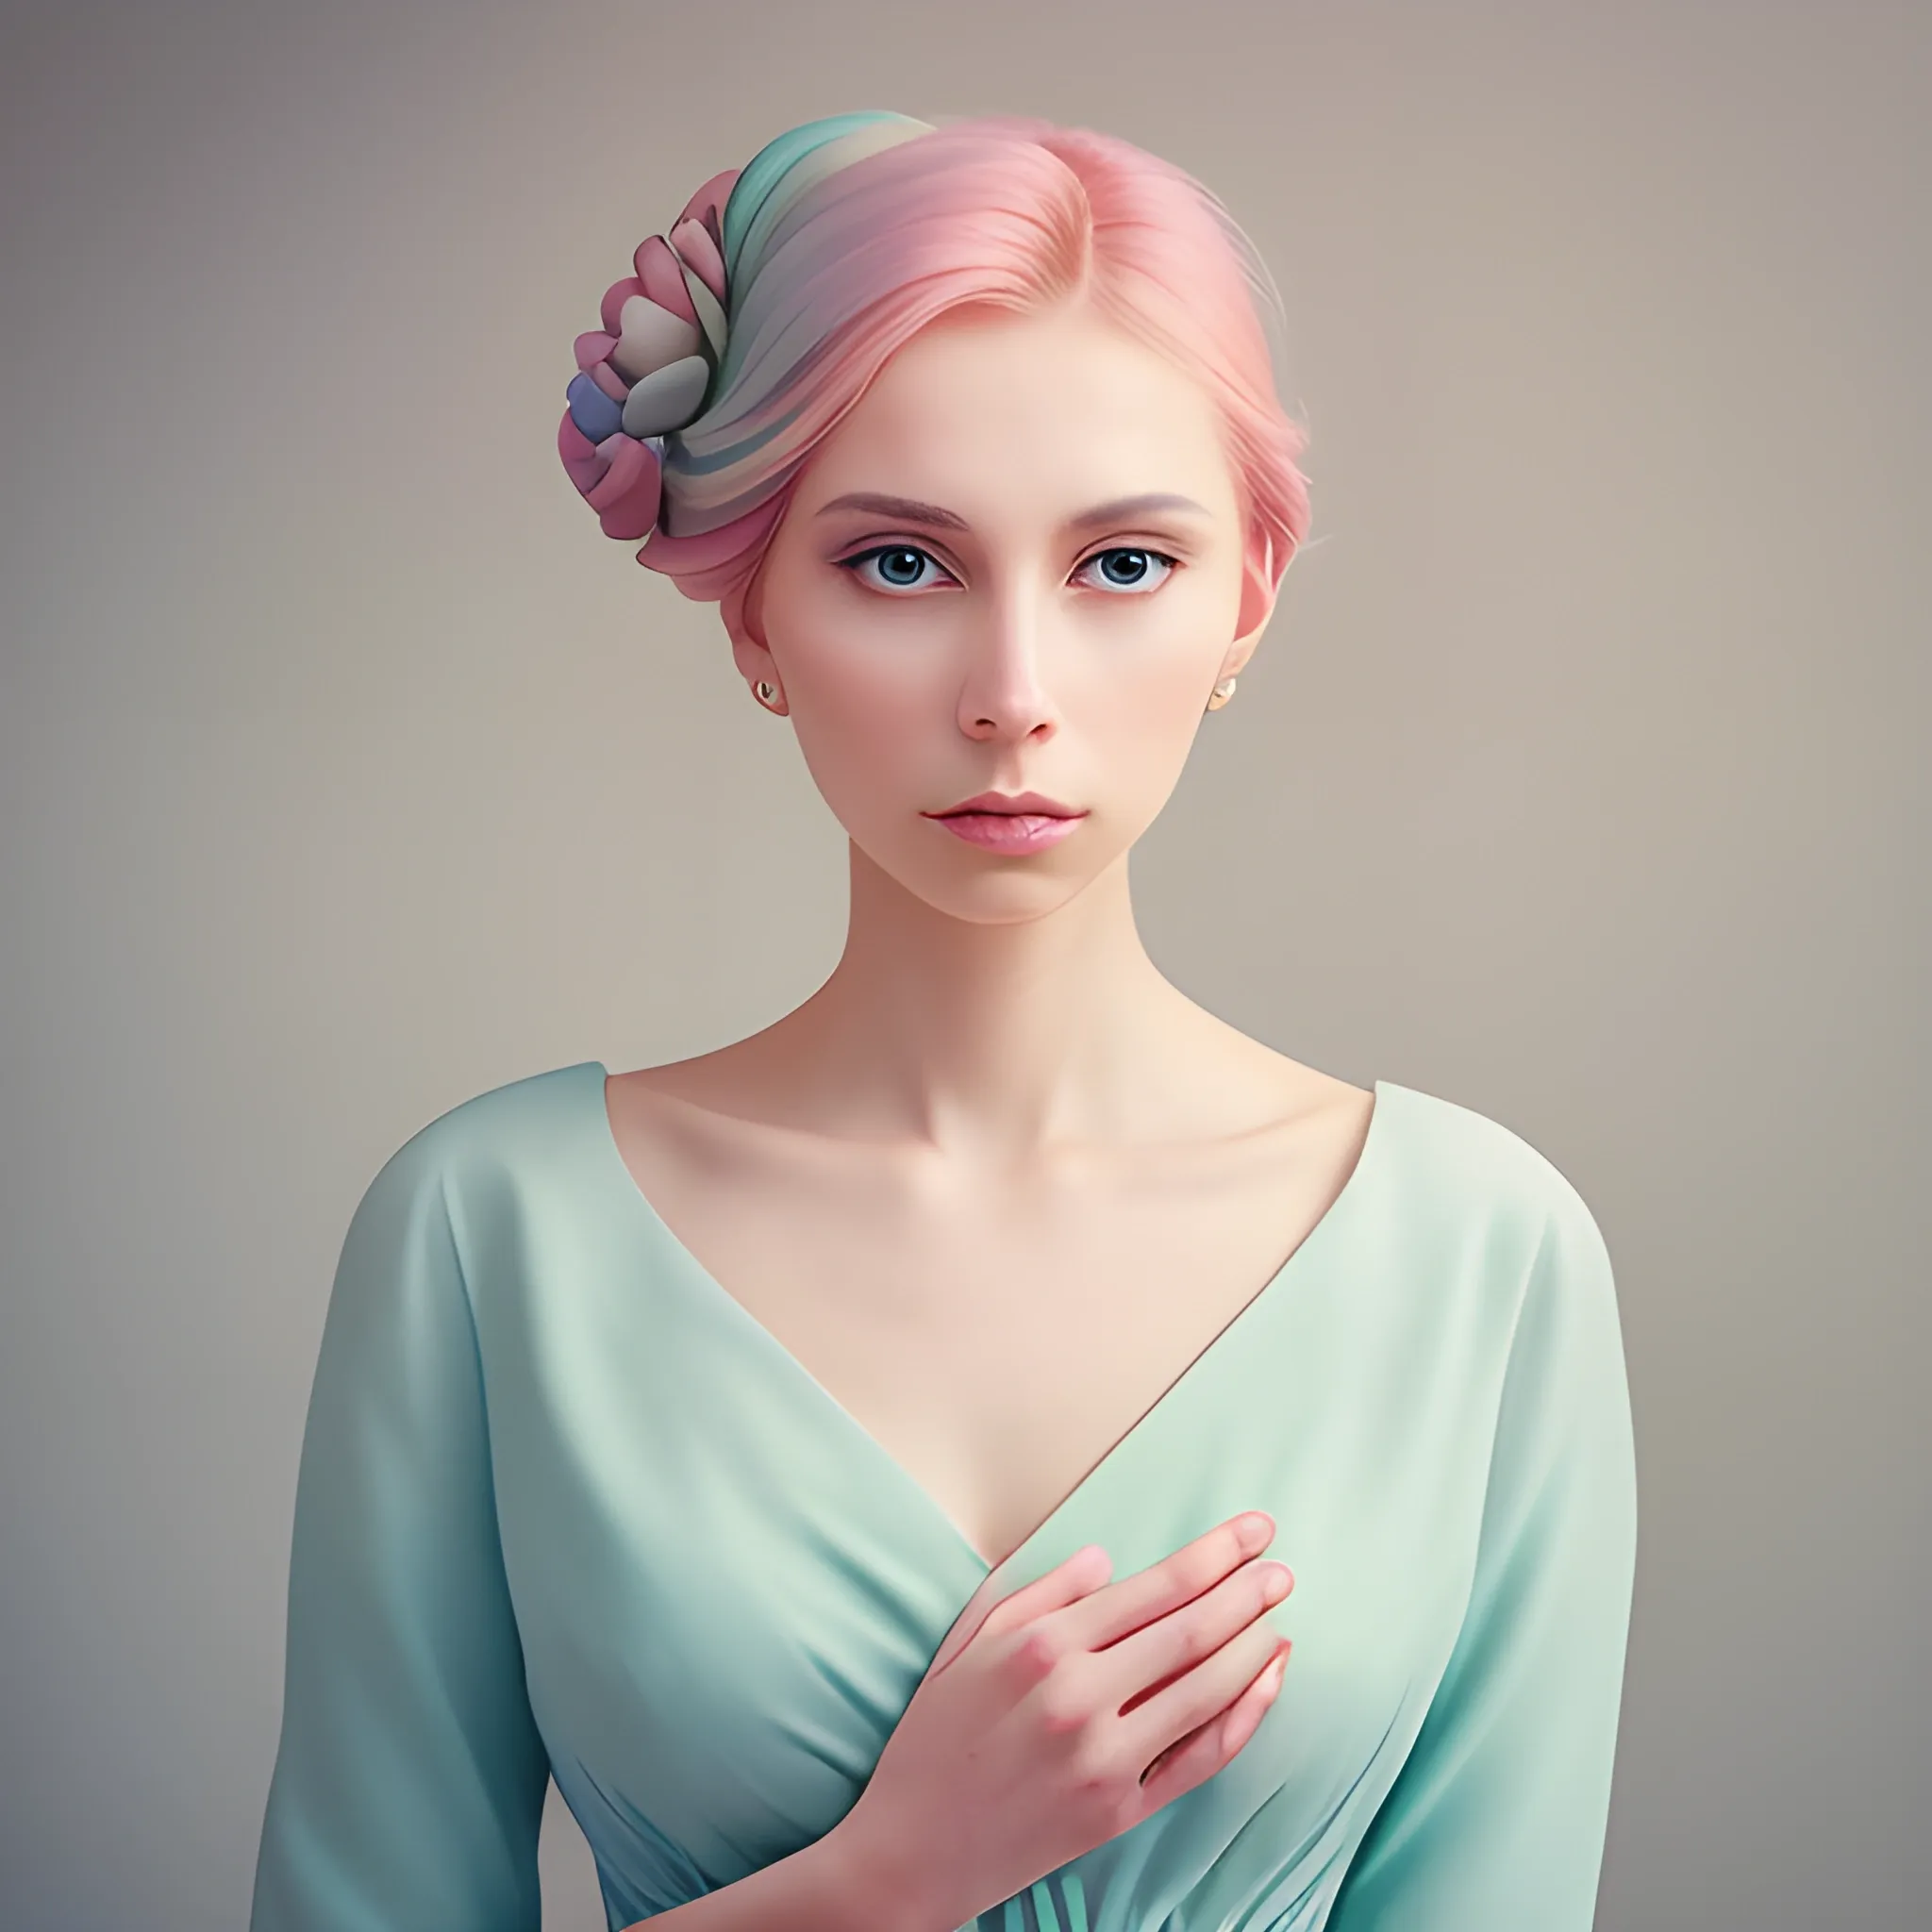 beautiful woman, full pastel color, solemn and elegant, professional photography